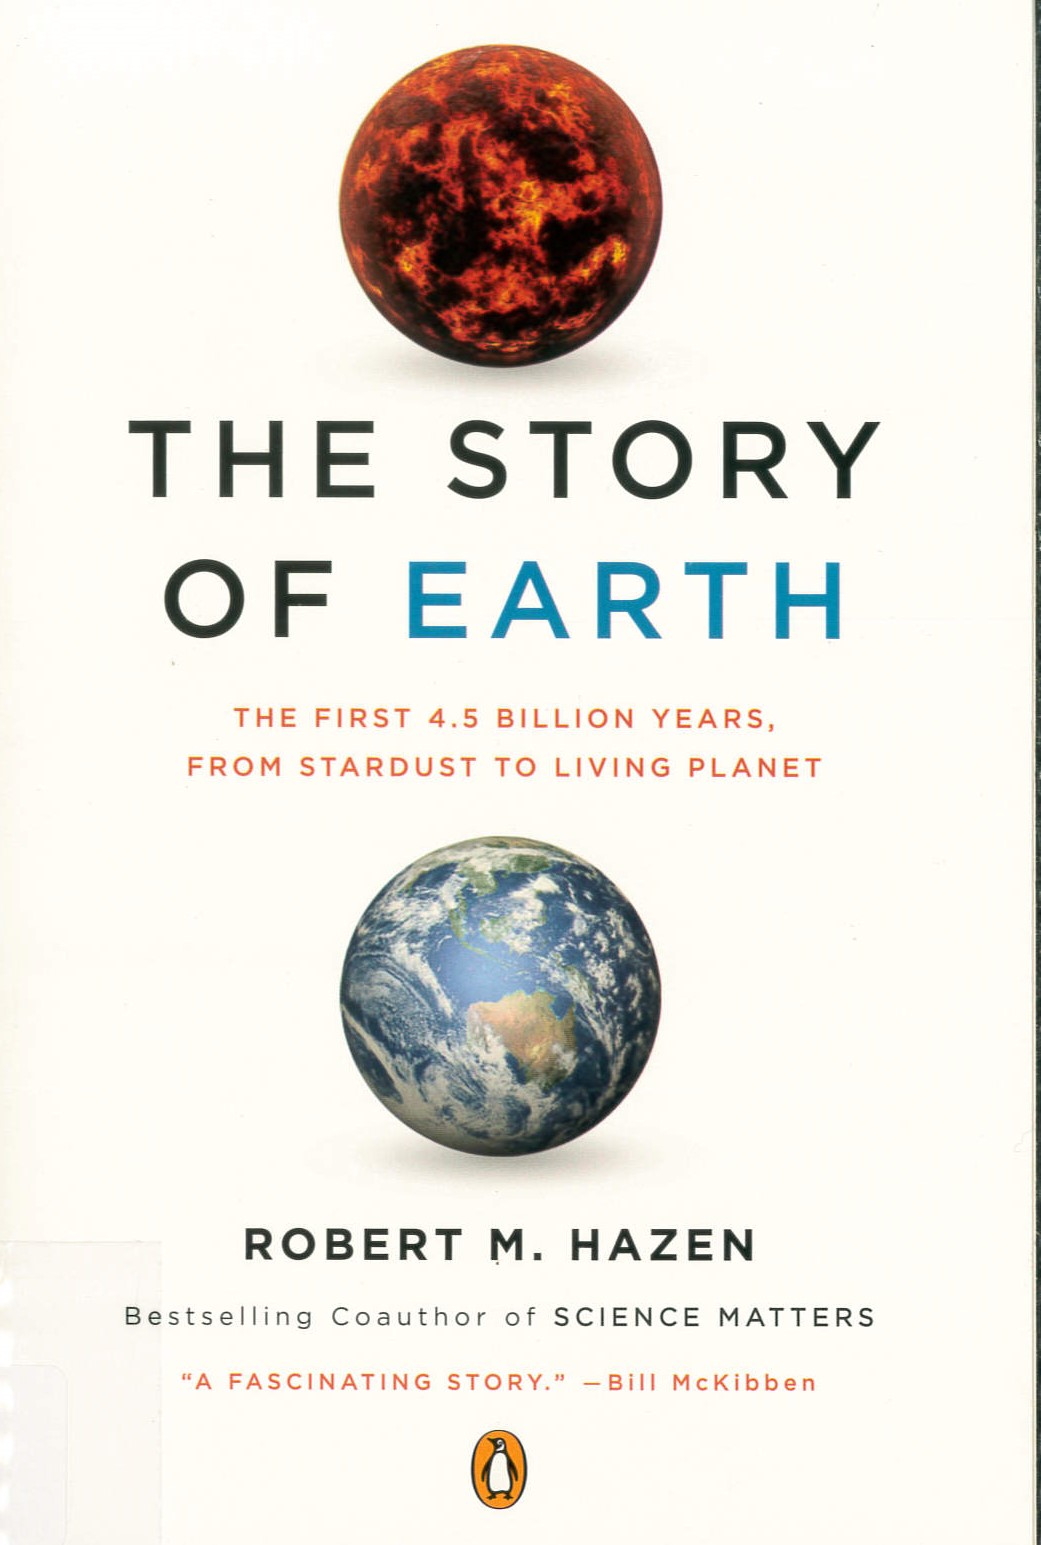 The story of Earth the first 4.5 billion years, from stardust to living planet